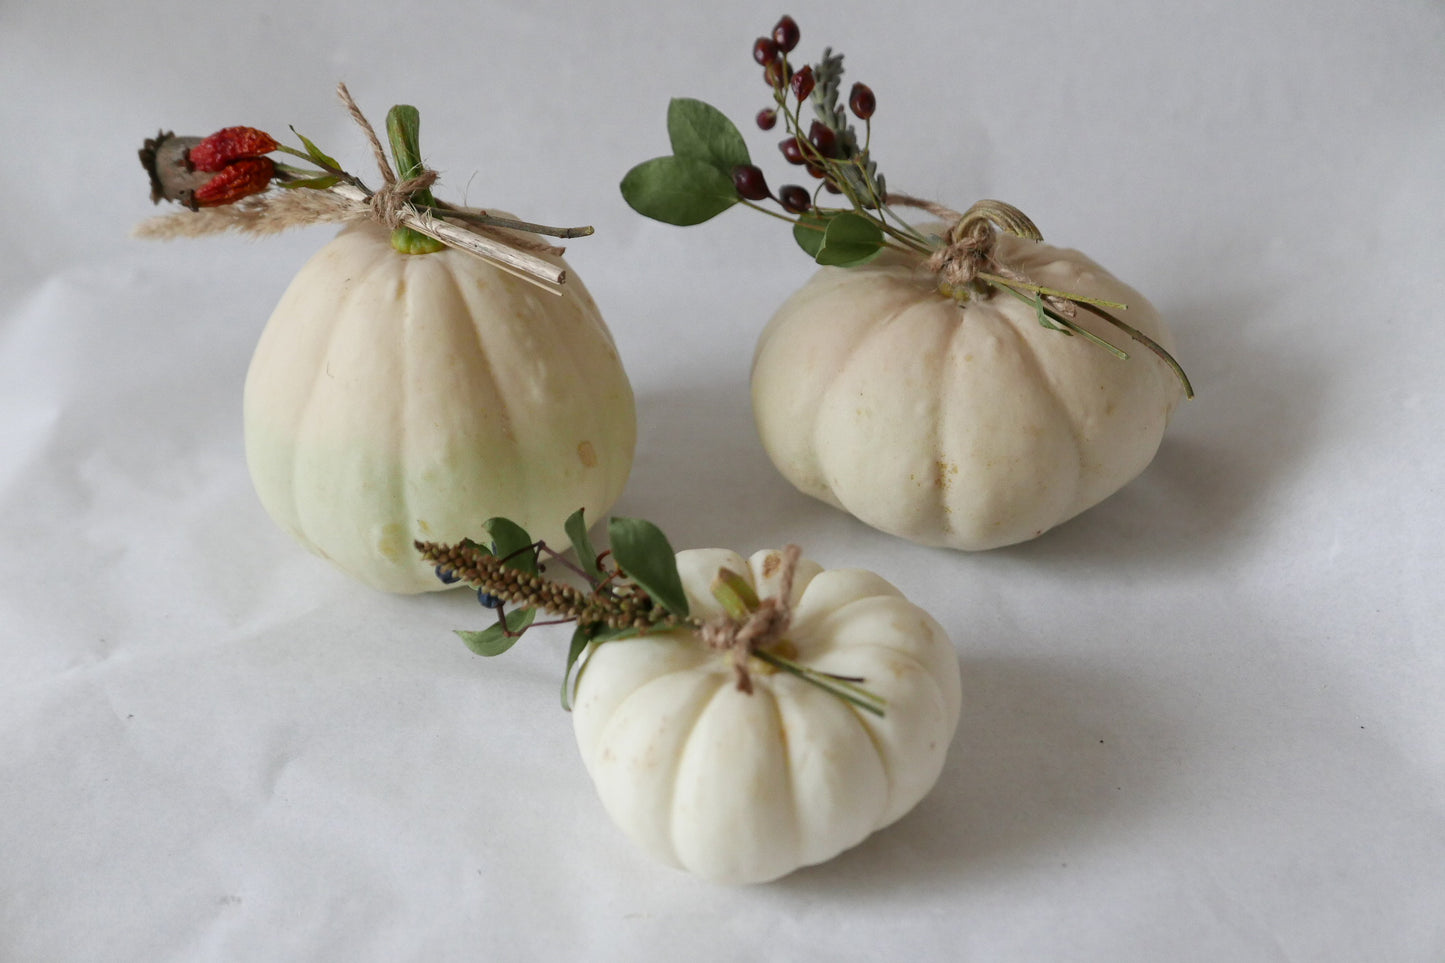 3 white ornamental pumpkins with dried flowers